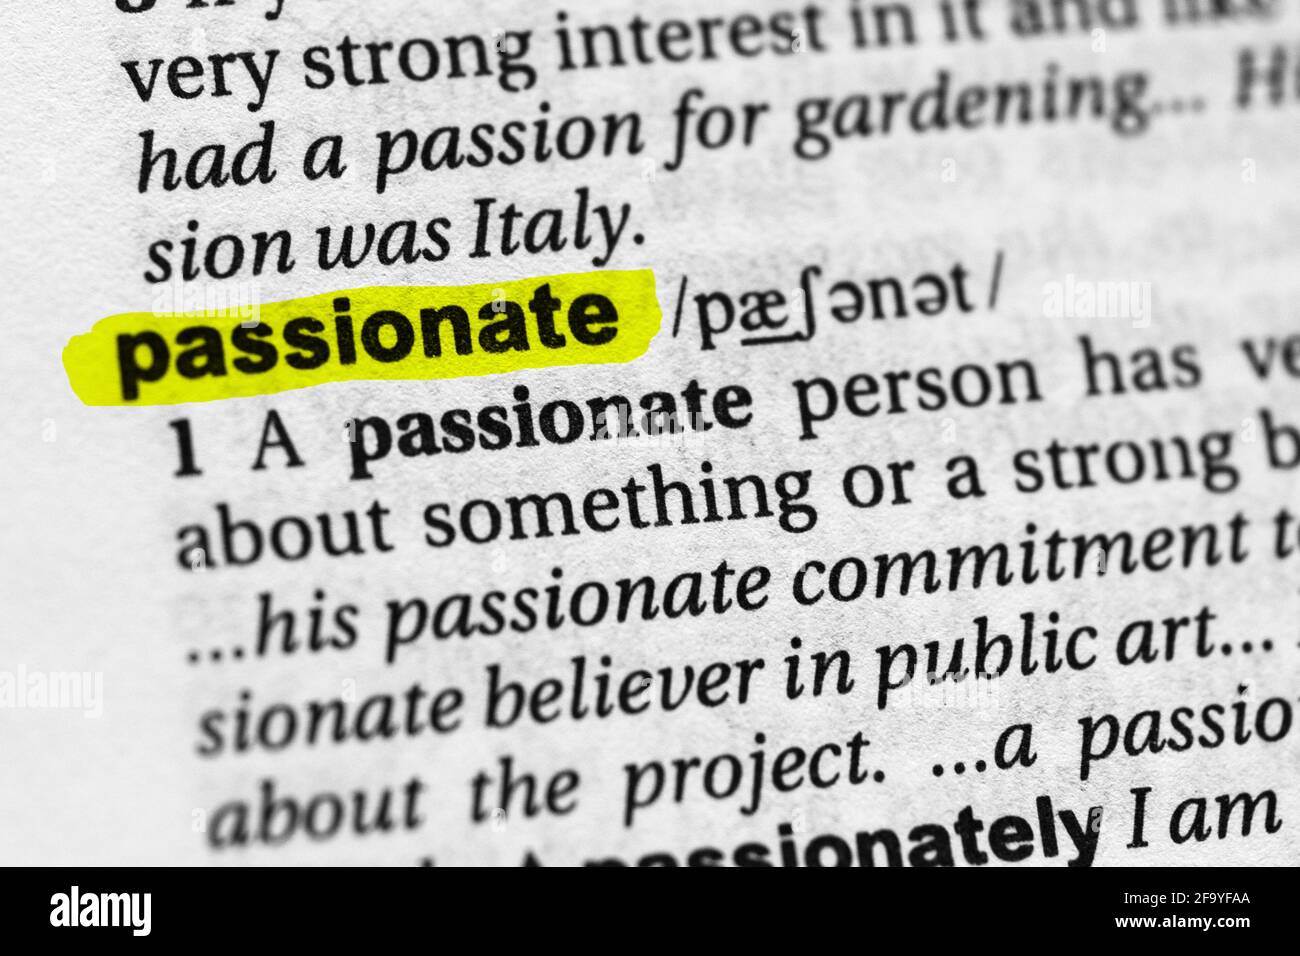 Passion meaning